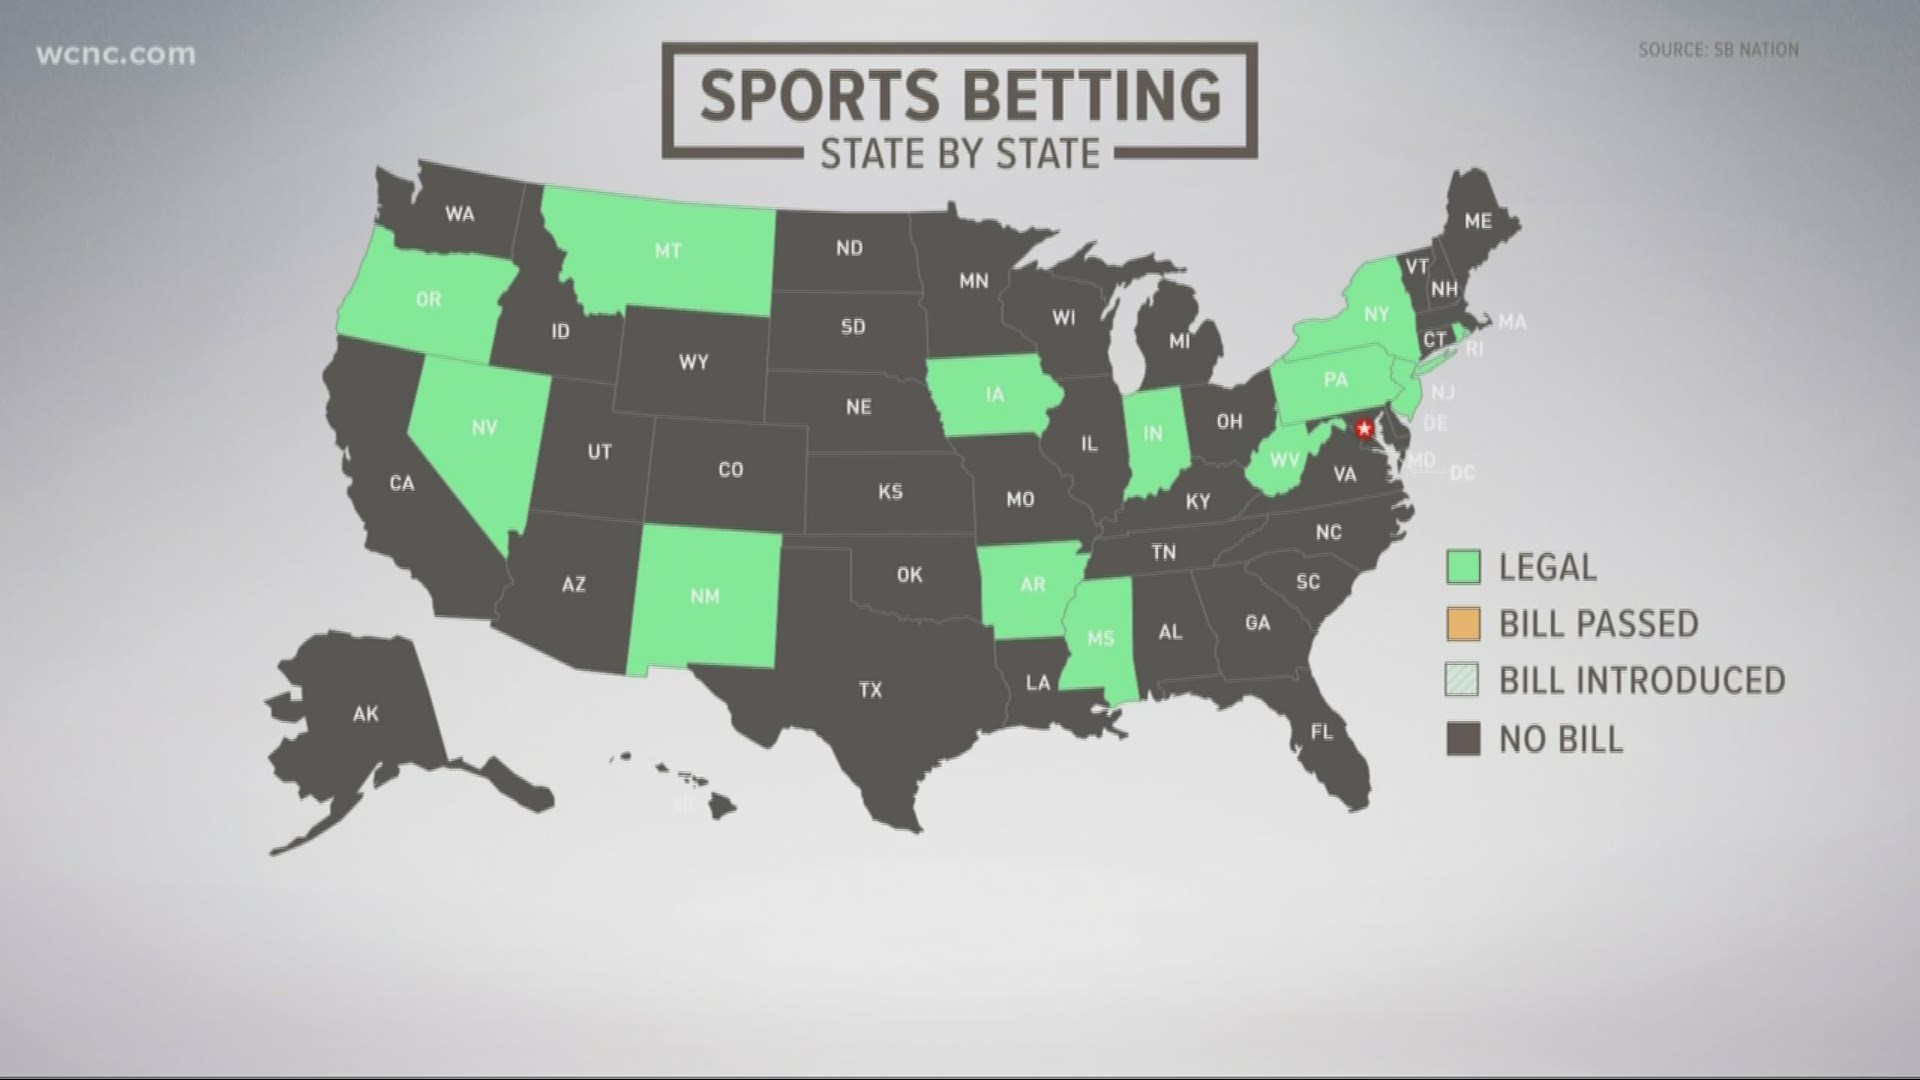 Sports betting is only legal in 13 states right now, but that list could be growing. Four states, including North Carolina, have passed bills opening the door for legalized sports betting.